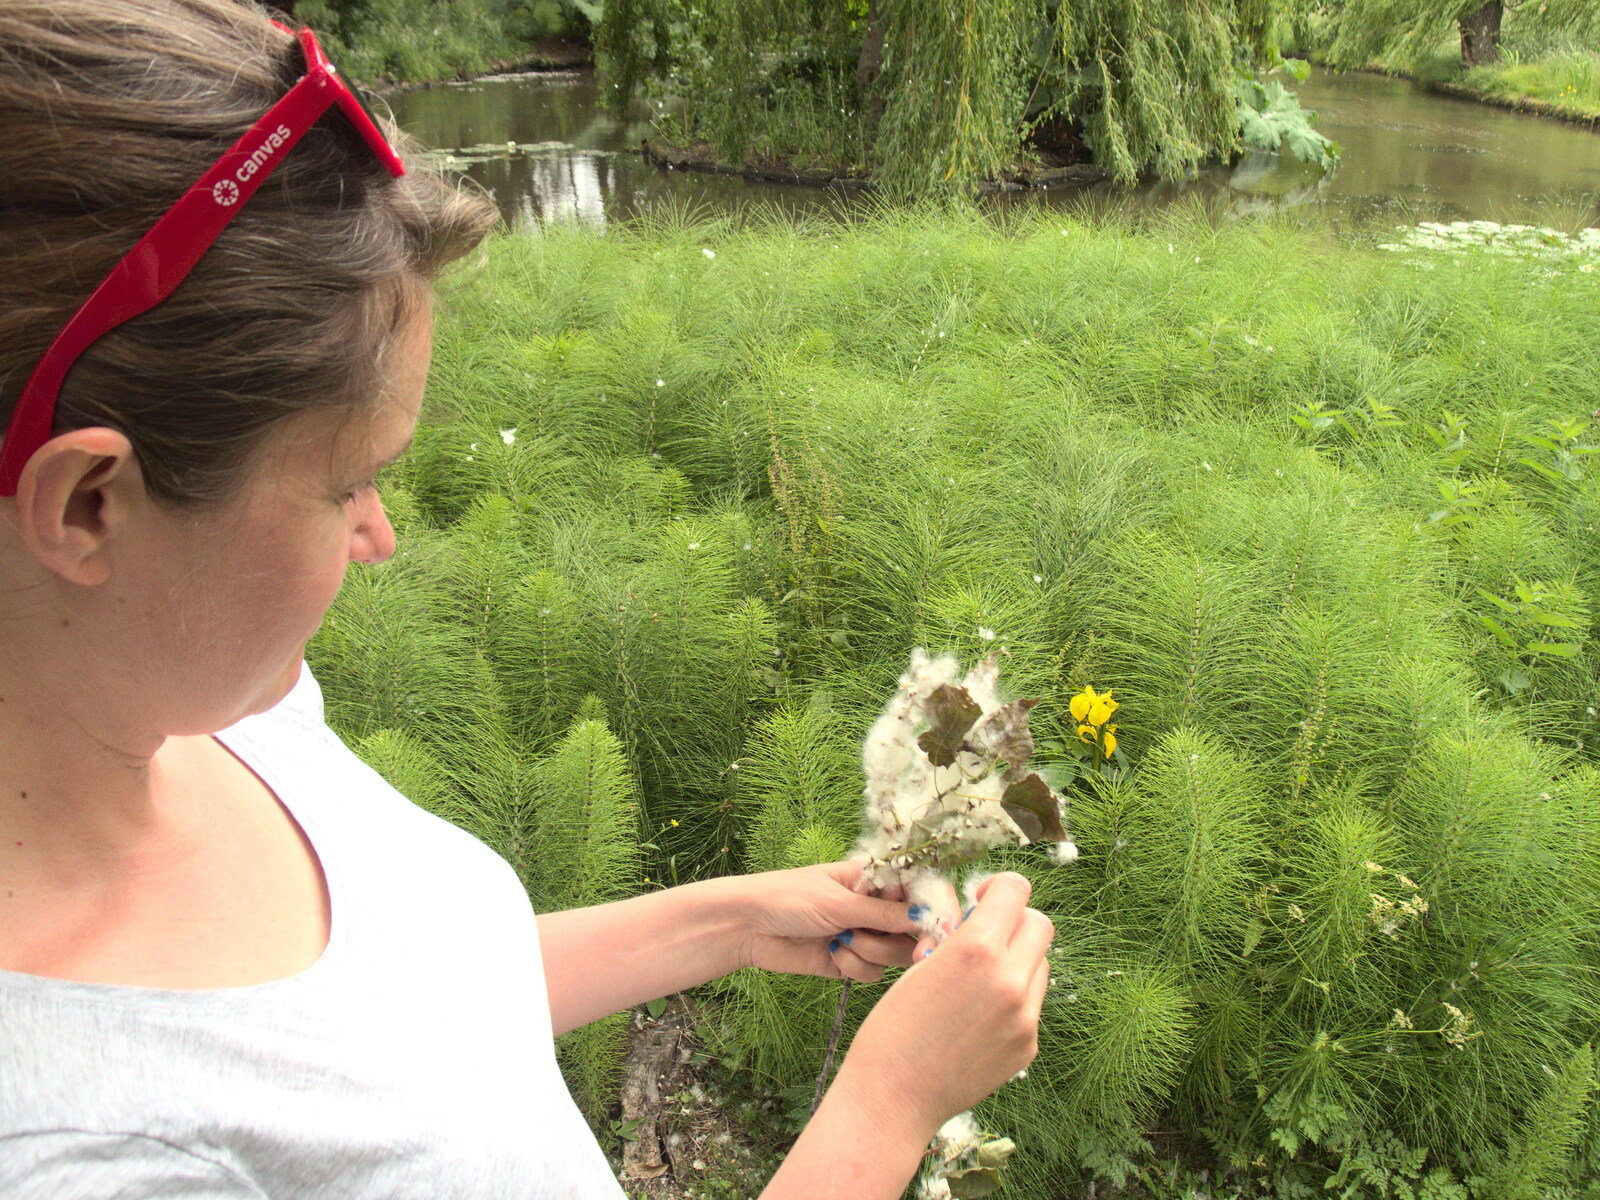 Isobel finds some fluffy plants from Lifehouse and Thorpe Hall Gardens, Thorpe-le-Soken, Essex - 11th June 2017